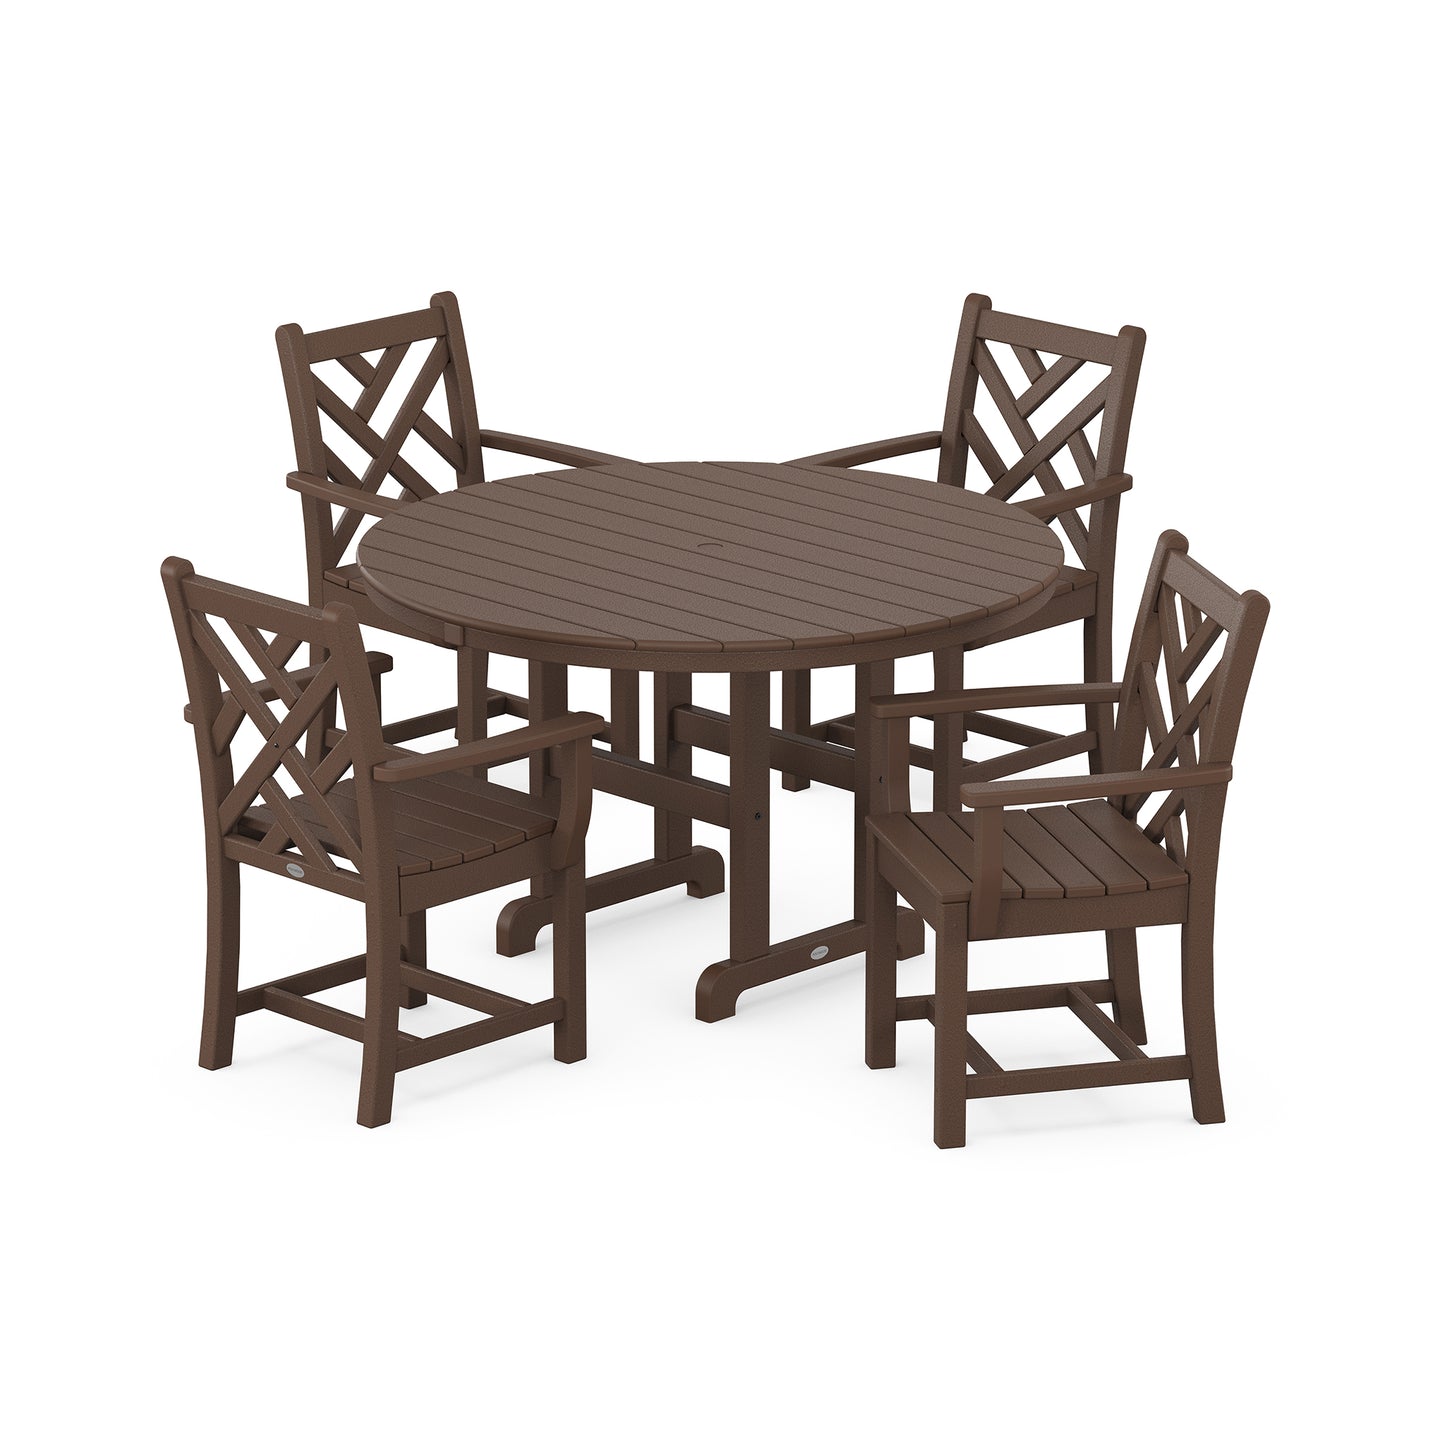 A POLYWOOD Chippendale 5-Piece Dining Set made from POLYWOOD® recycled lumber, with four matching chairs featuring a Chippendale back design, set on a plain white background.